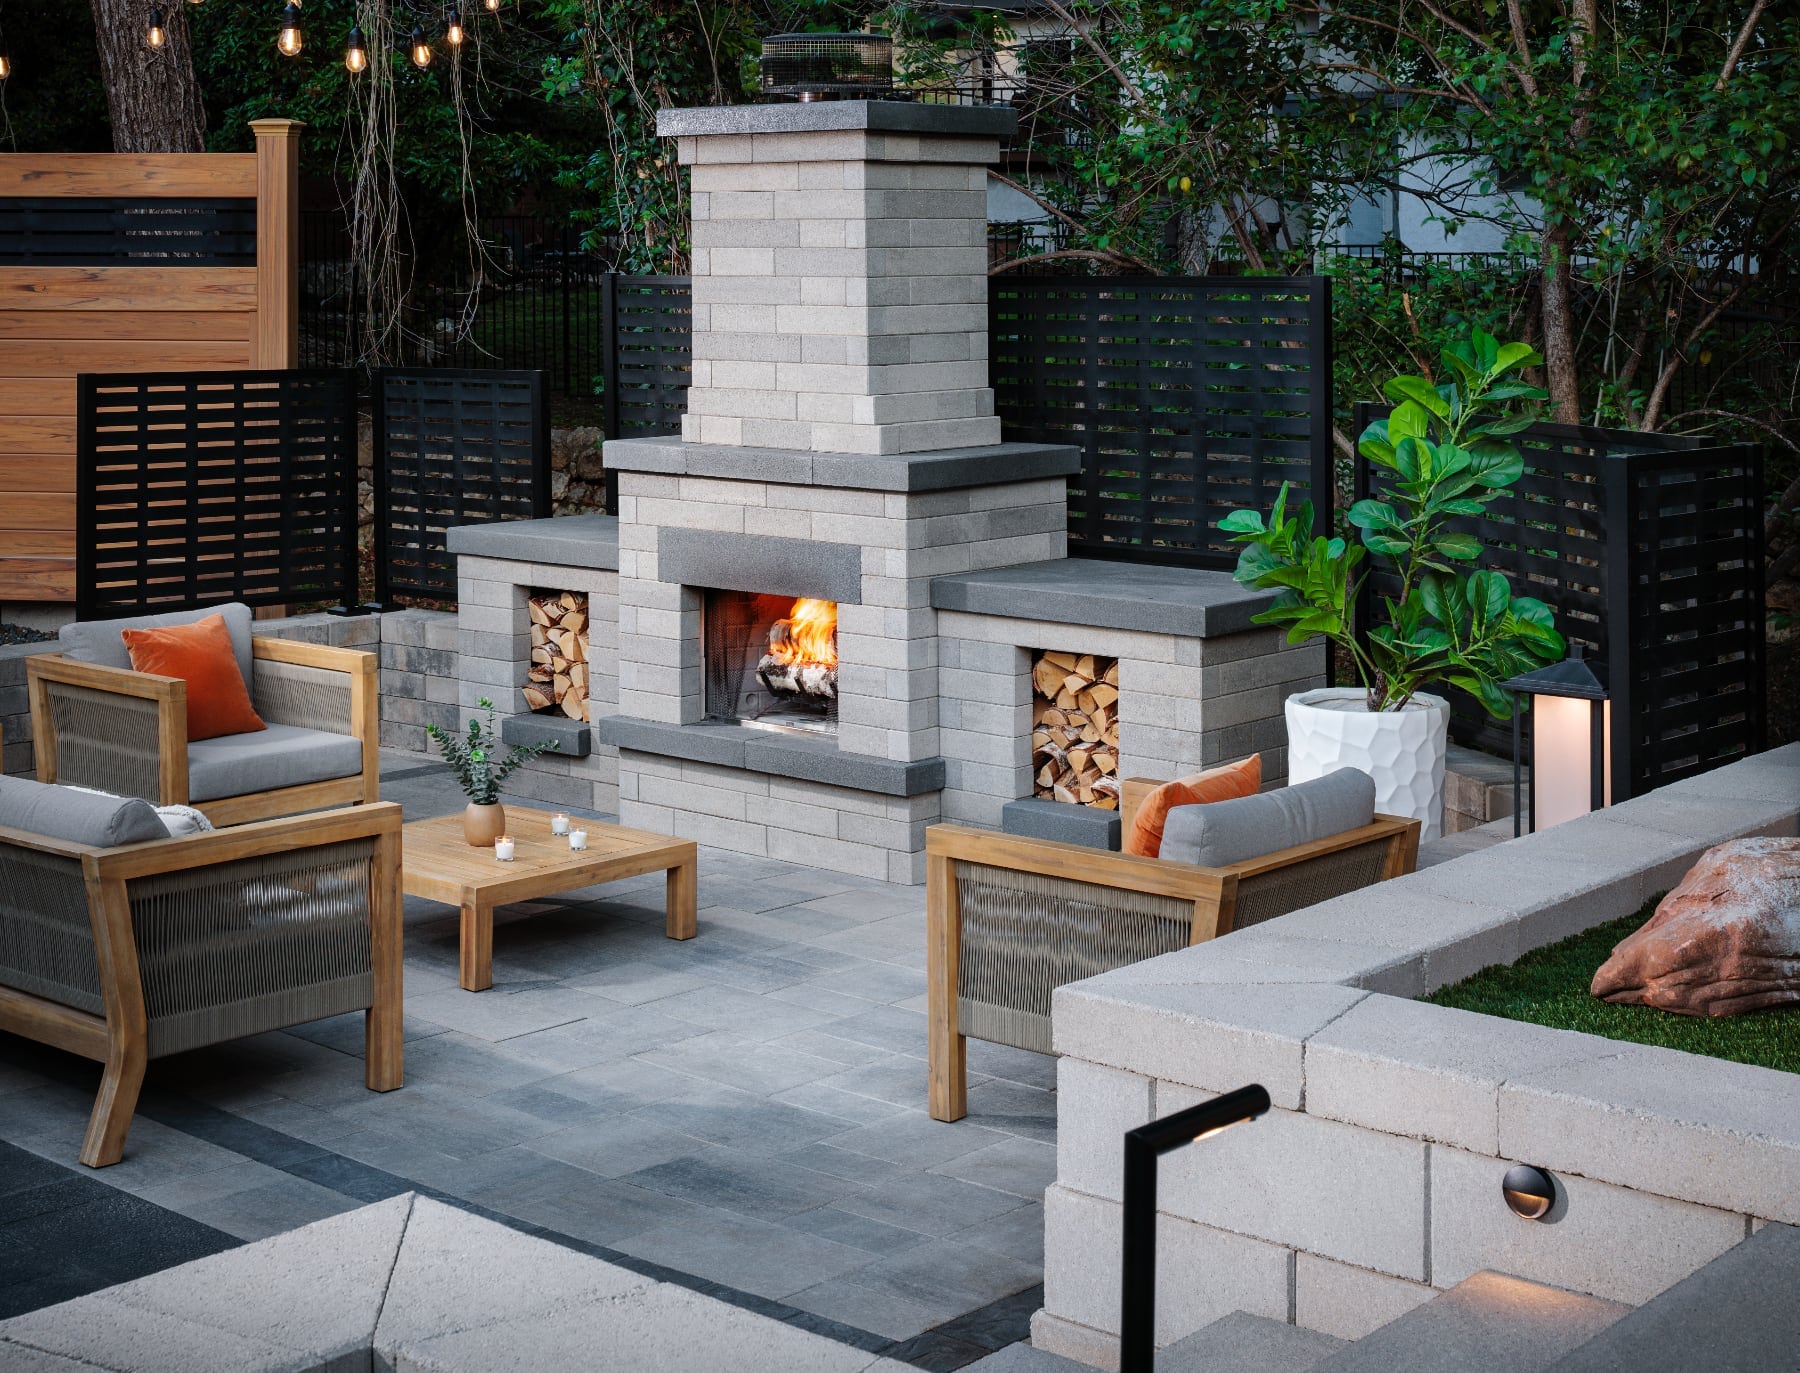 An outdoor living room with a fireplace